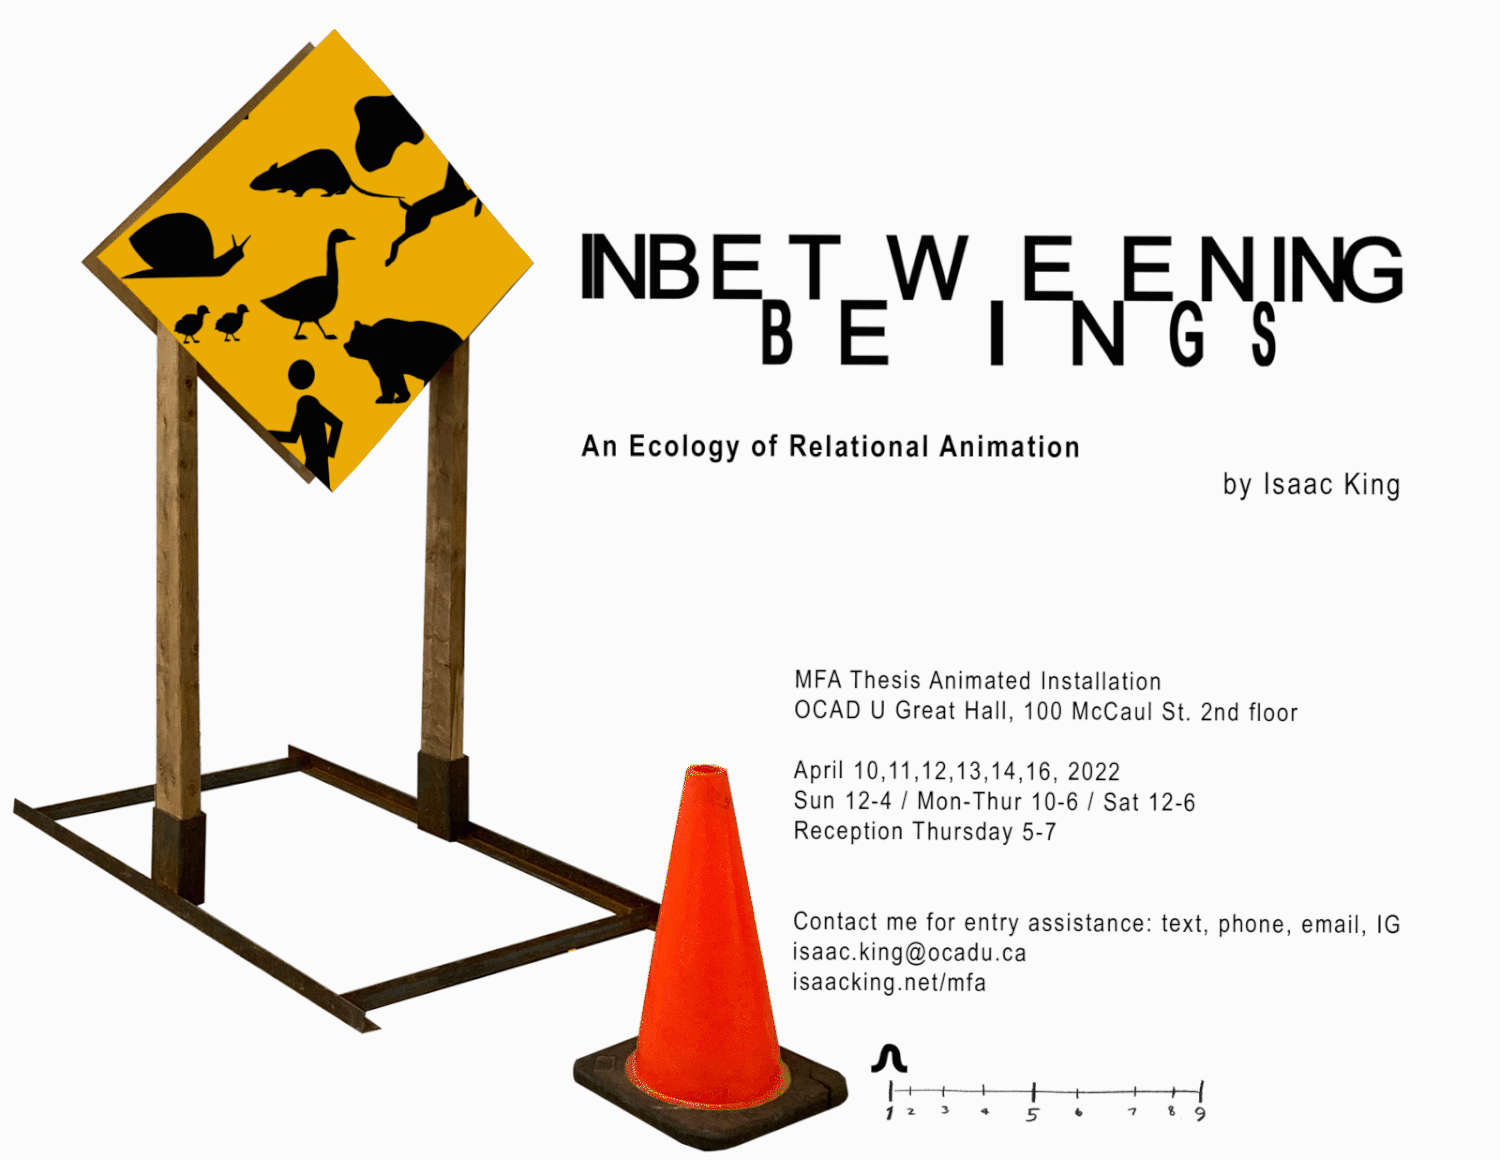 A Yellow caution street sign with various animal icons and a red pylon in front with the text as in the description